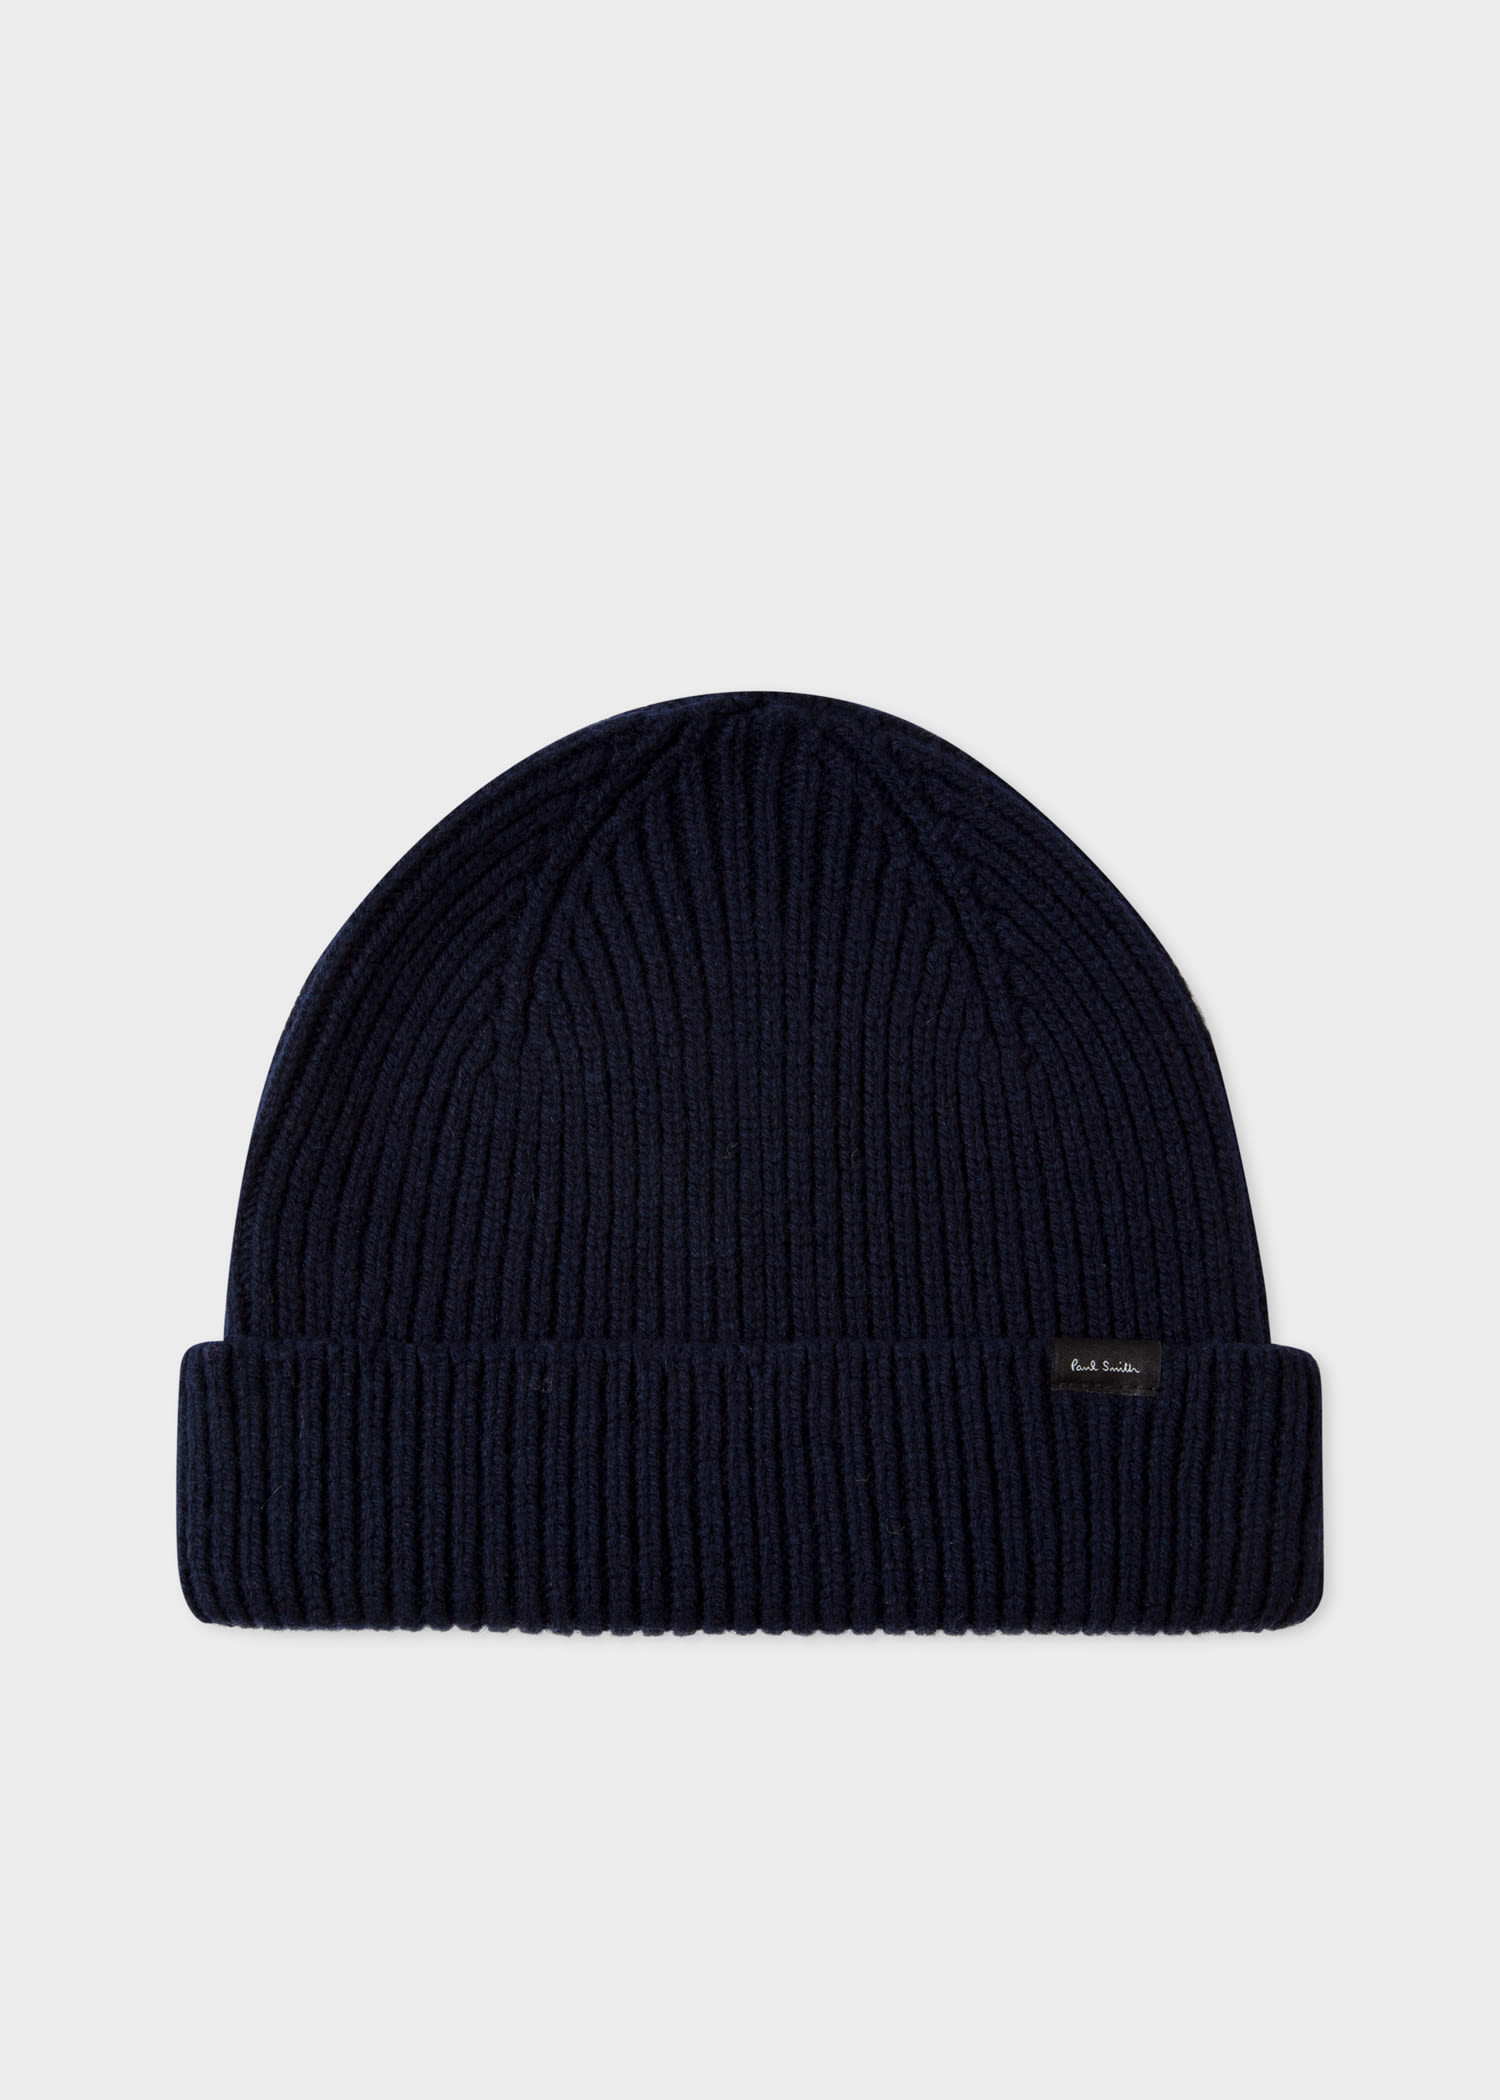 Paul Smith Navy Cashmere-blend Ribbed Beanie Hat In Blue